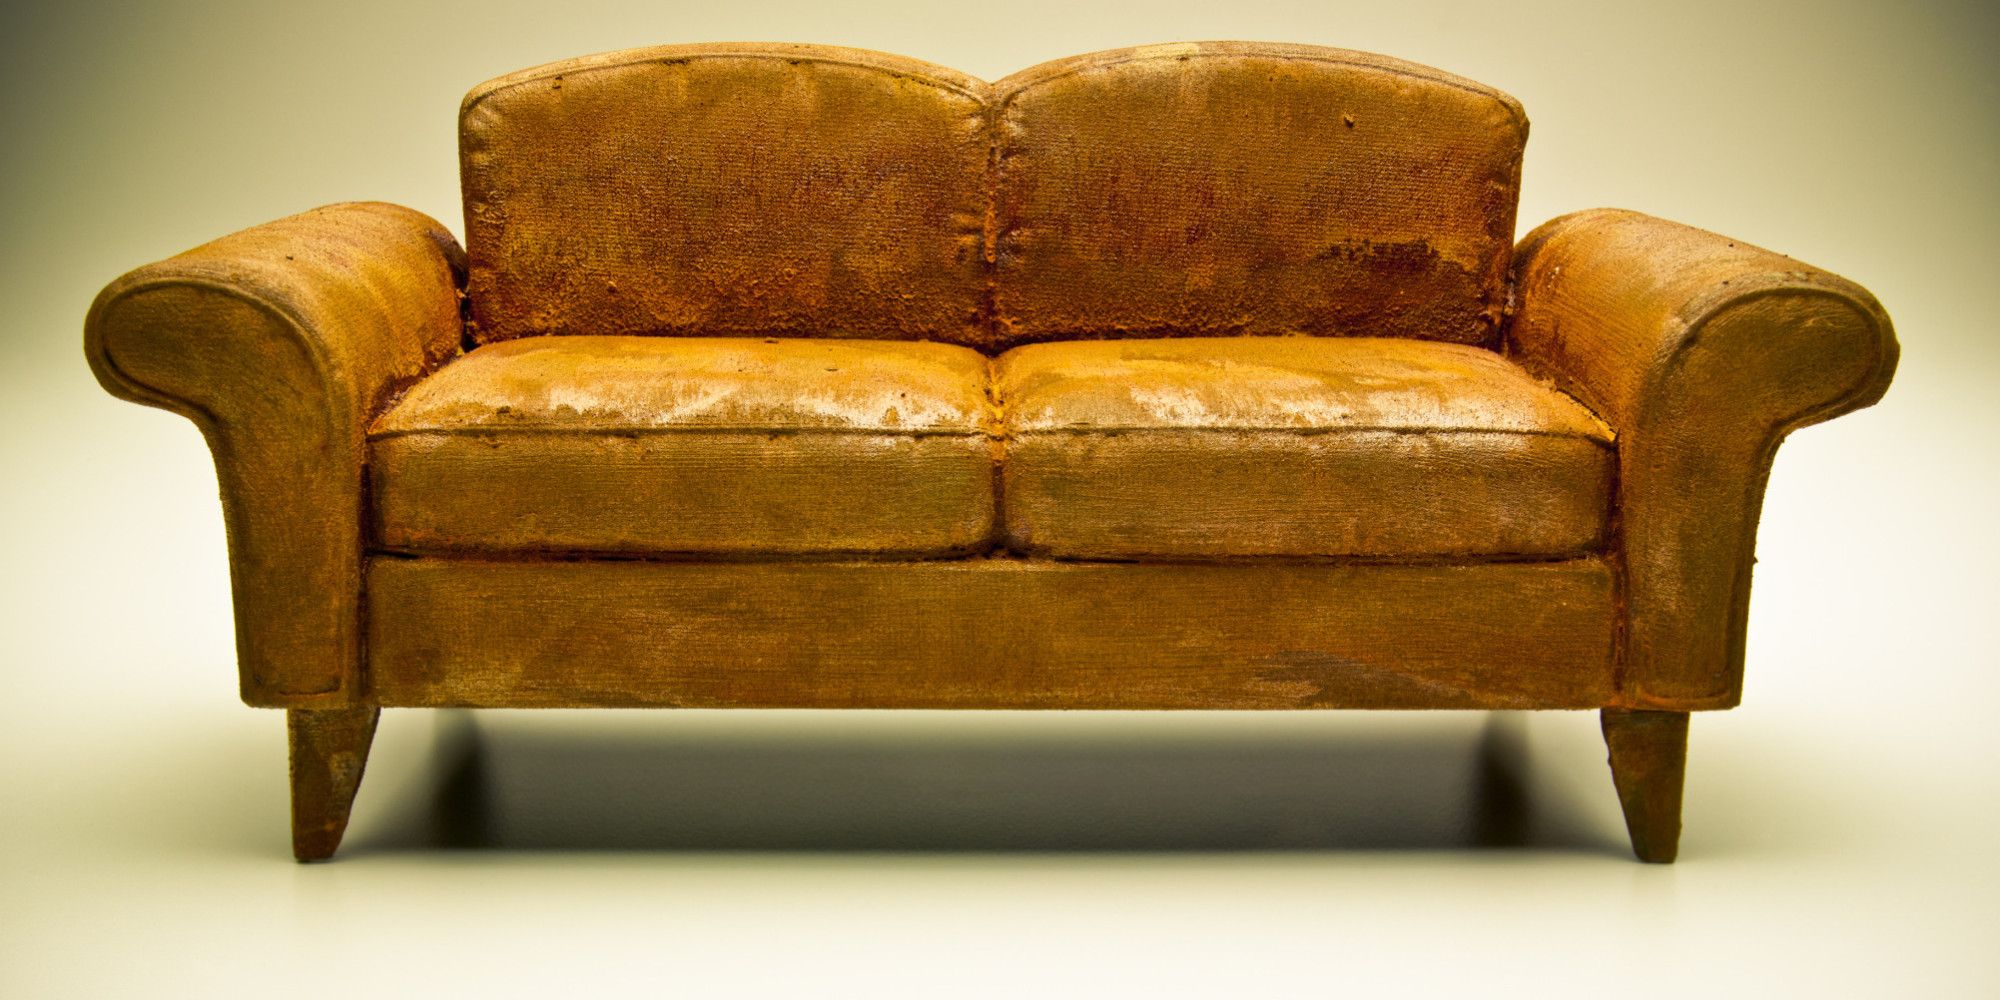 old couch - Google Search | テクスチャ | Pinterest | Attic